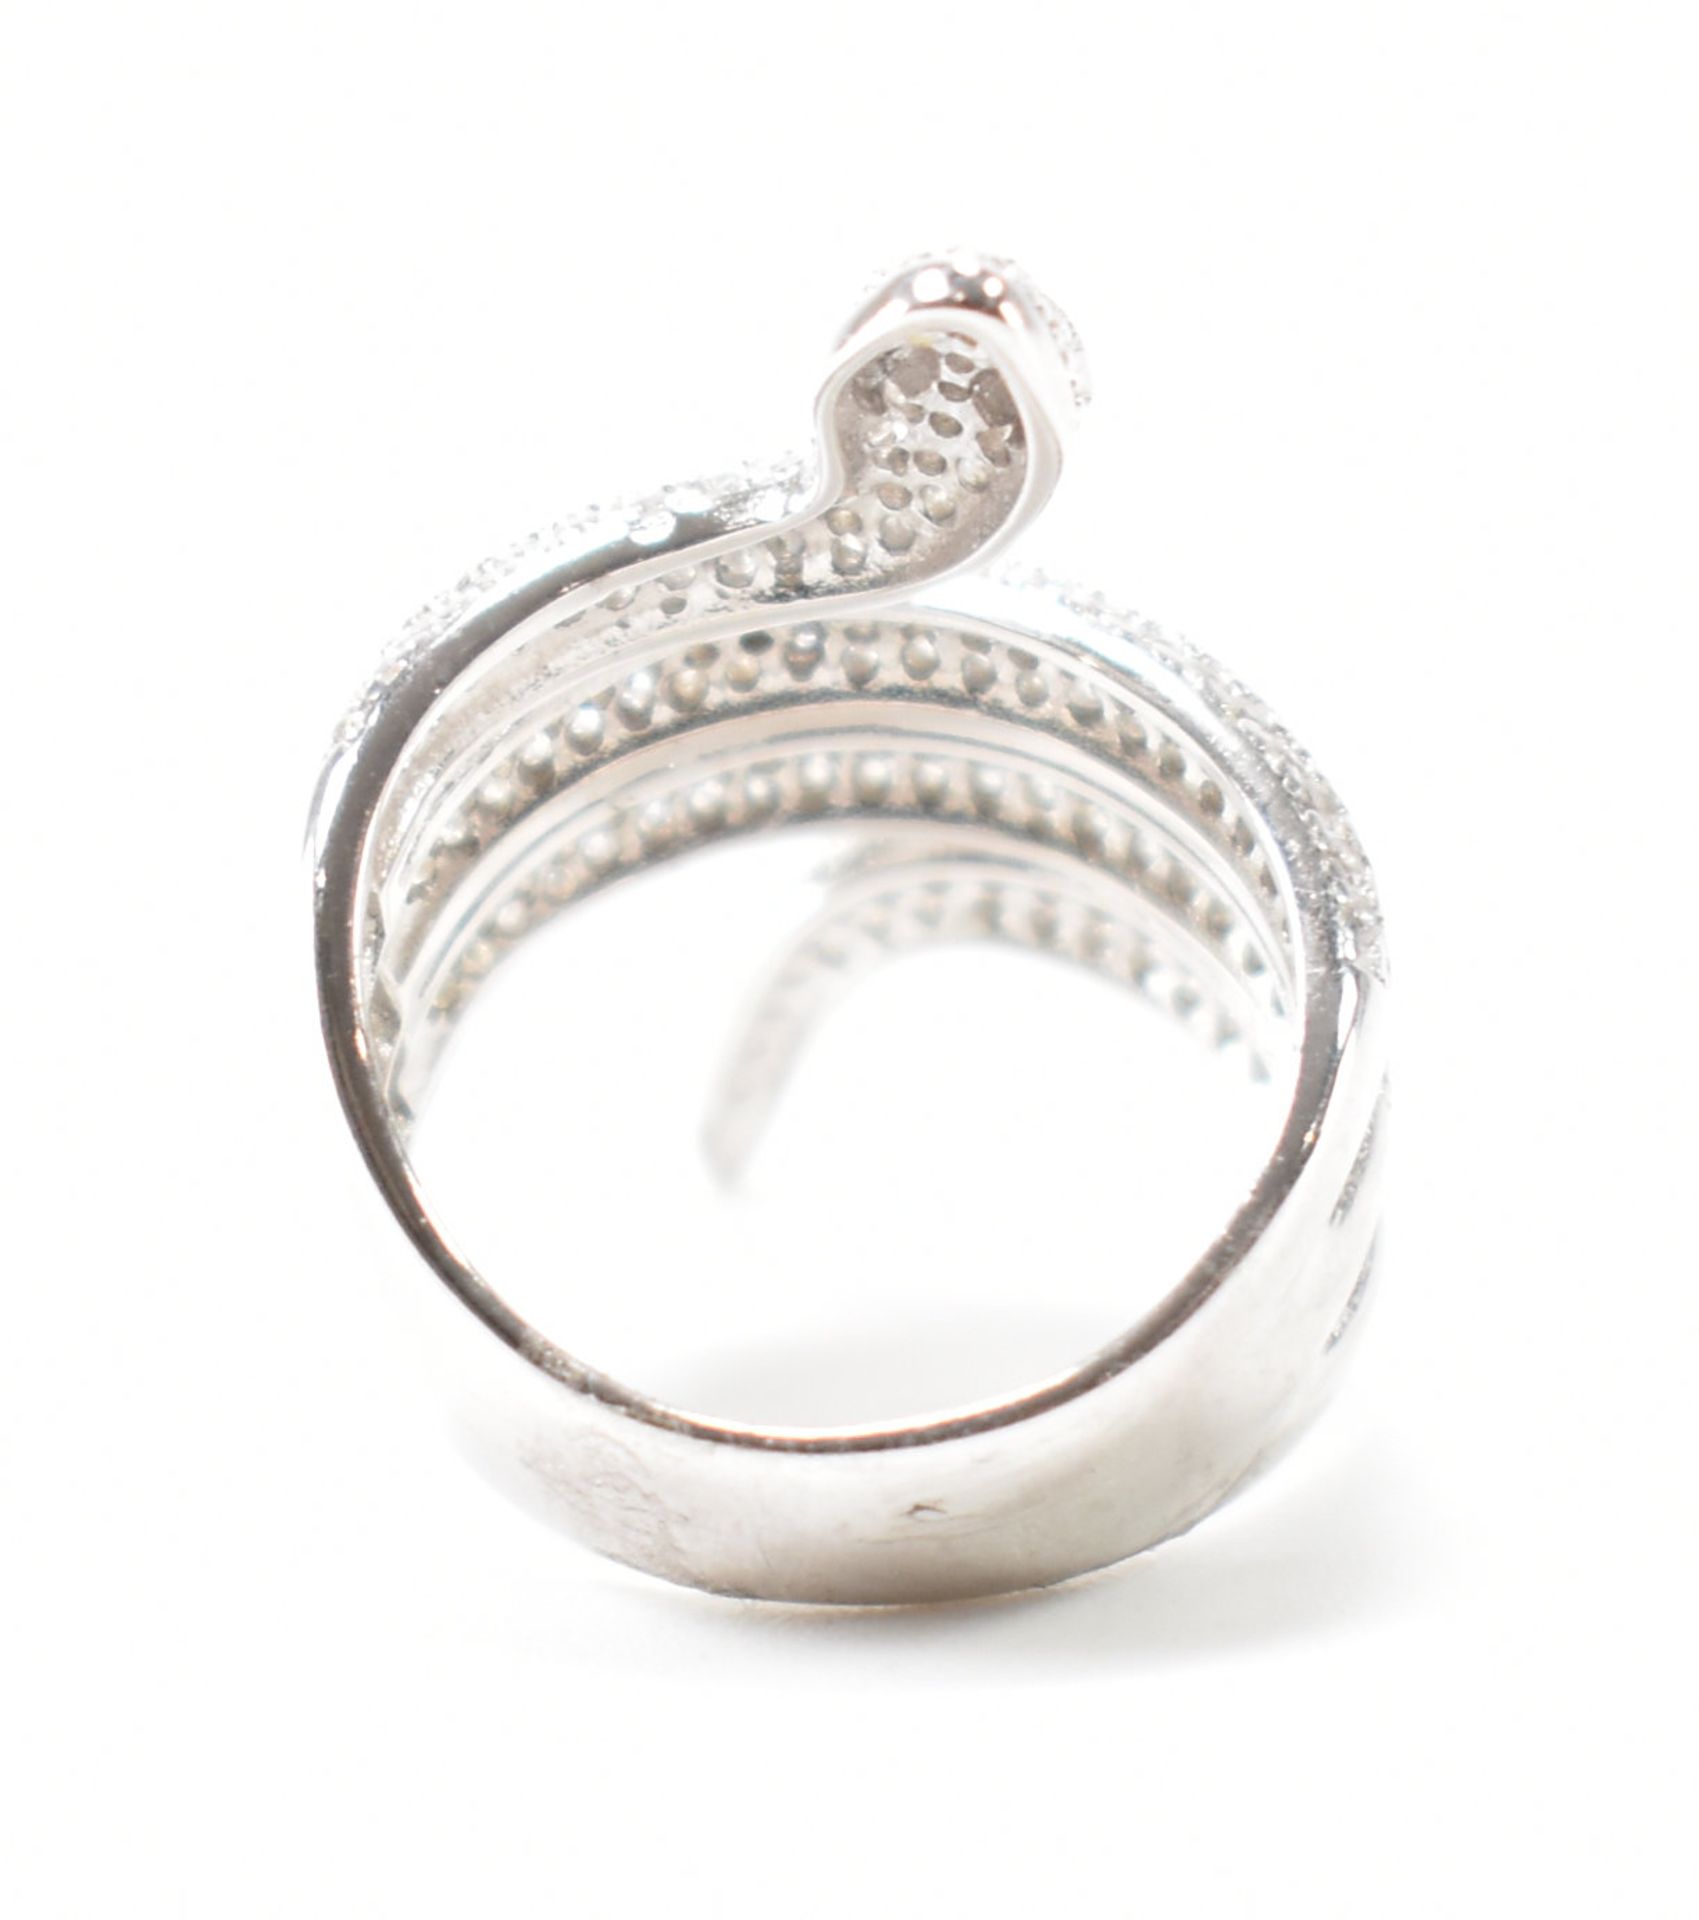 925 SILVER COILED SERPENT RING - Image 4 of 8